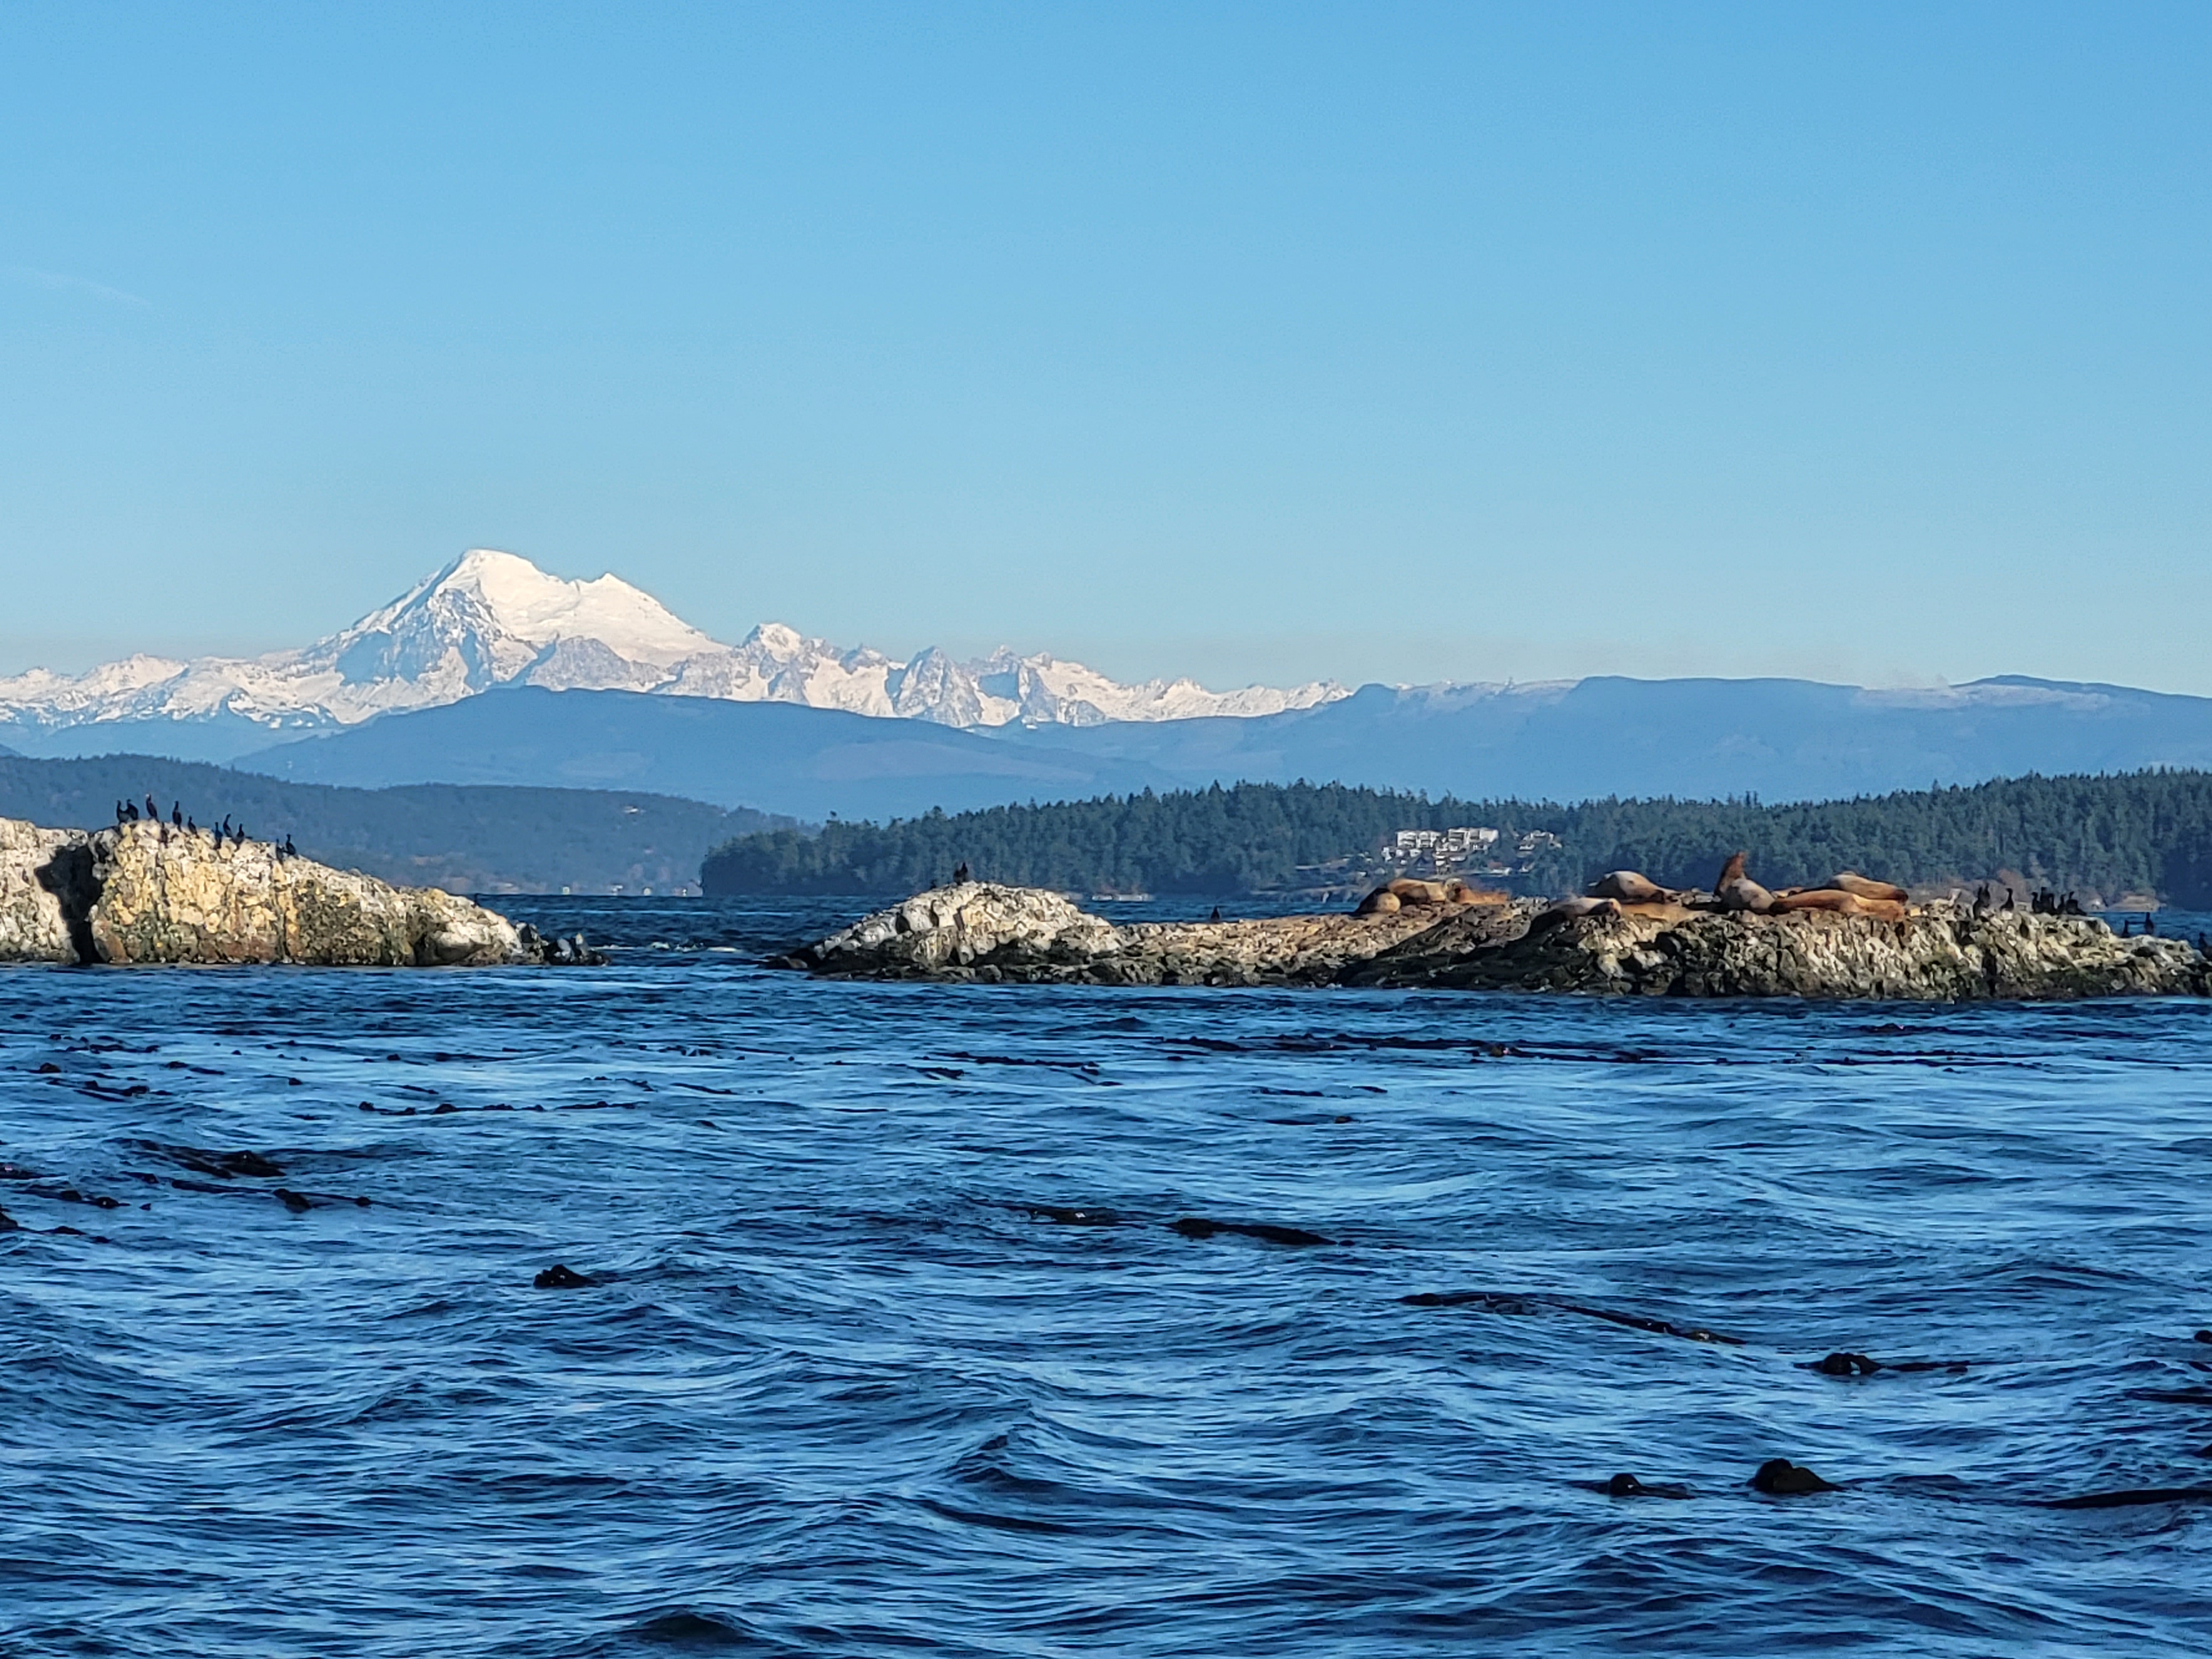 Stellar sea lion on rocks with water and Mt Baker